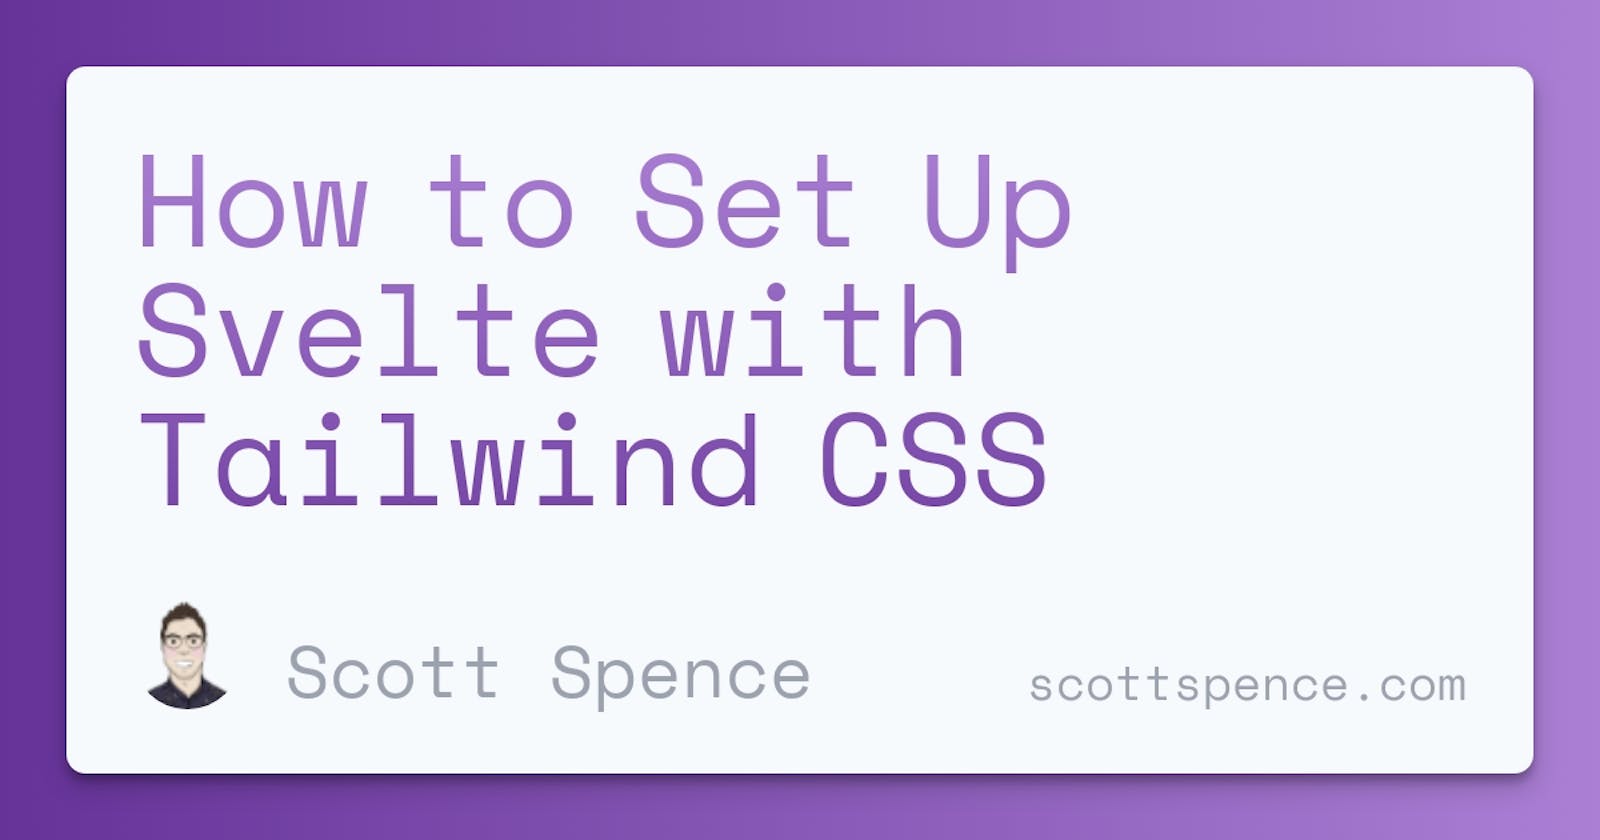 How to Set Up Svelte with Tailwind CSS